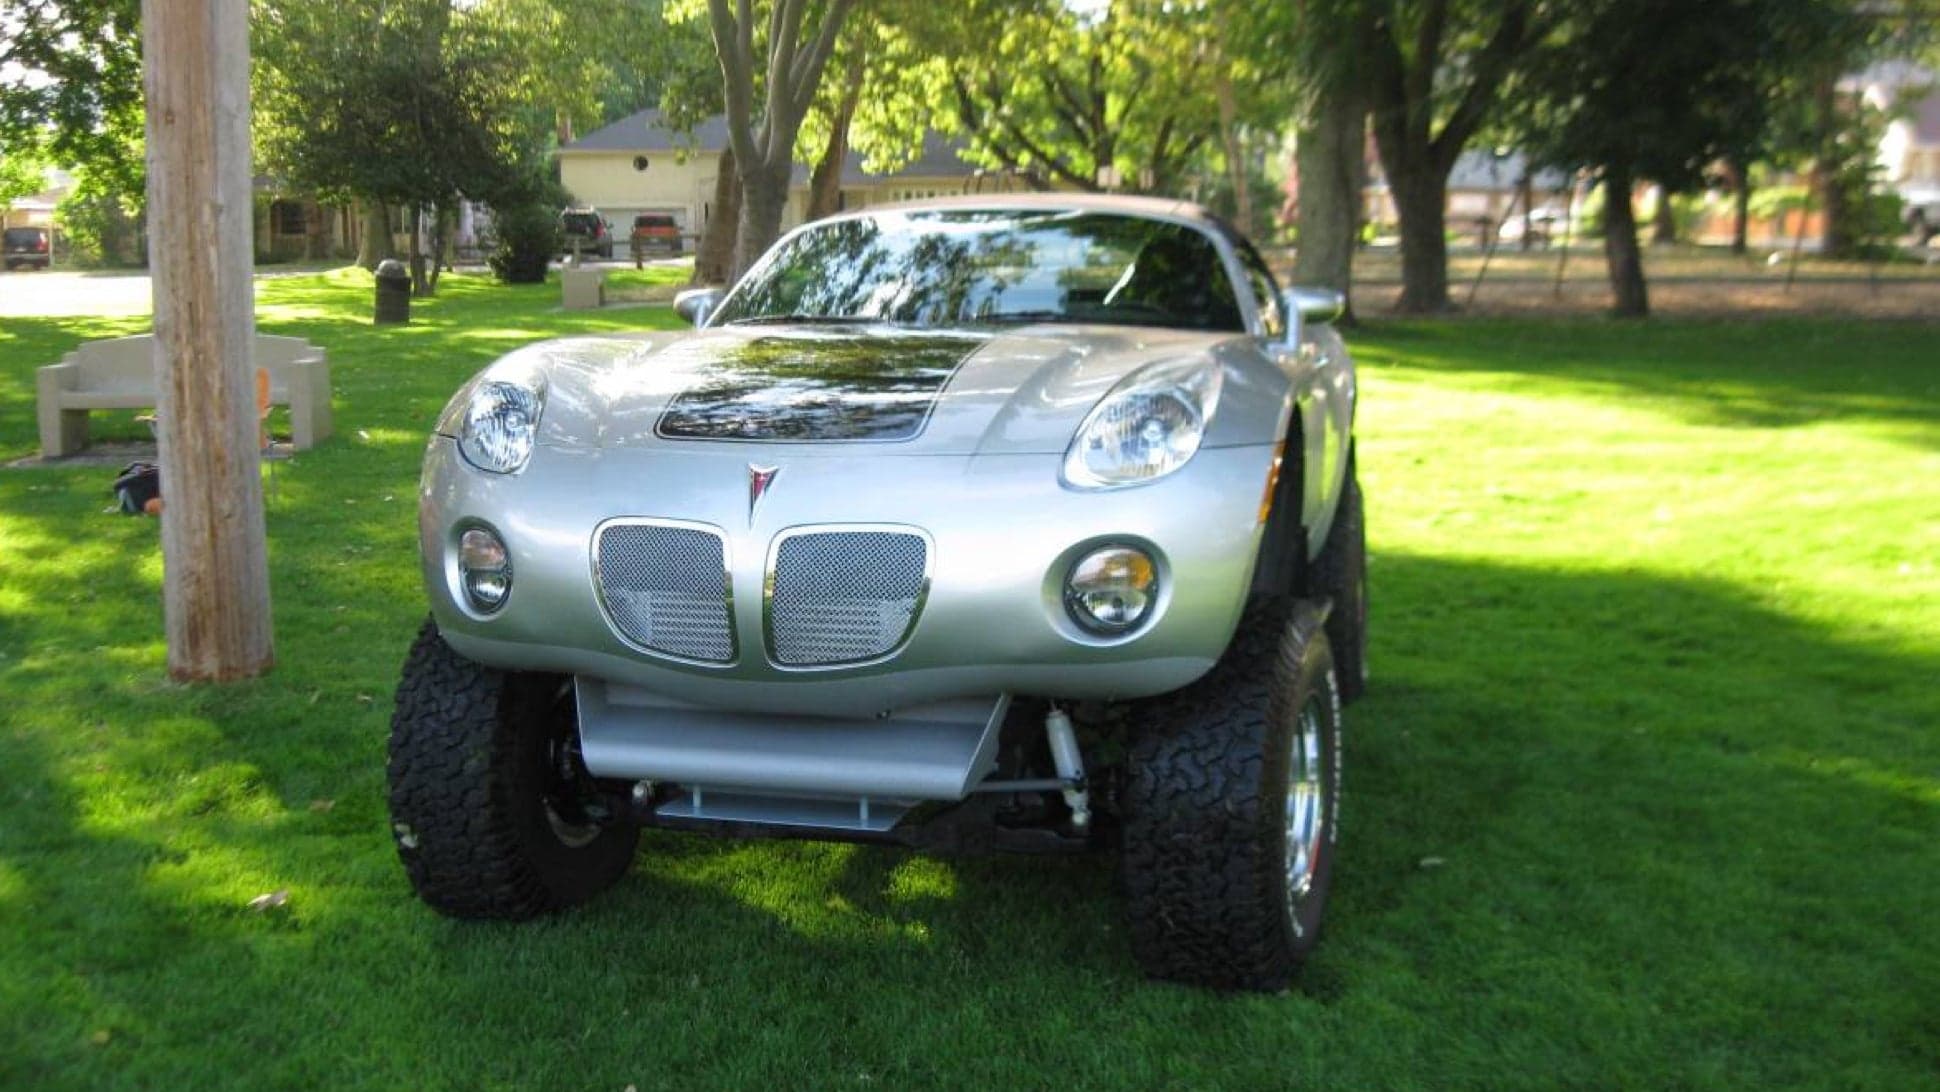 This Apocalypse-Grade, Lifted Pontiac Solstice Is Too Good for Such a Try-Hard Macho Craigslist Ad